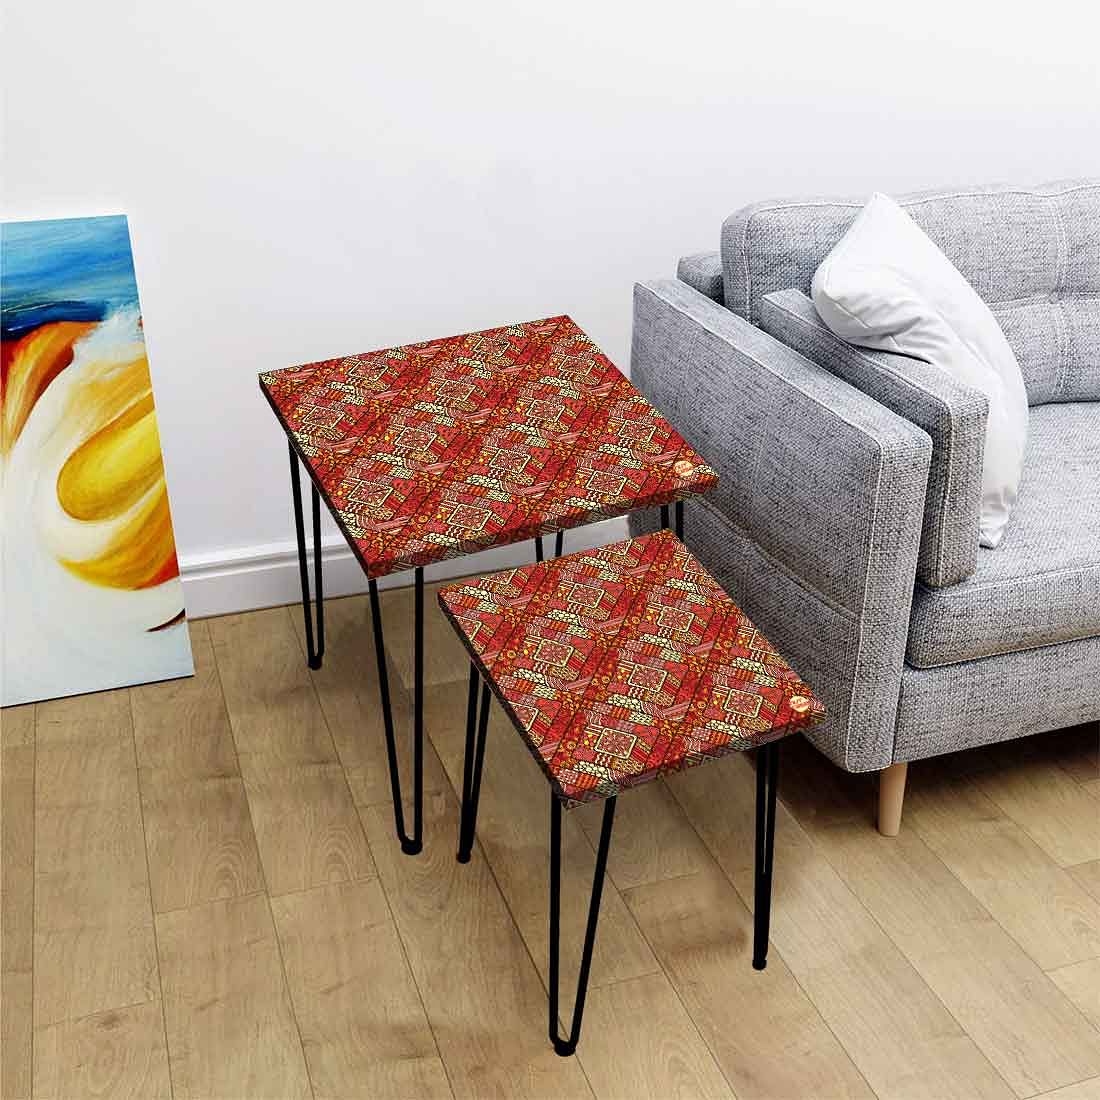 Designer Nesting Tables Tea & Coffee End Table for Living Room - Indian Ethnic Nutcase